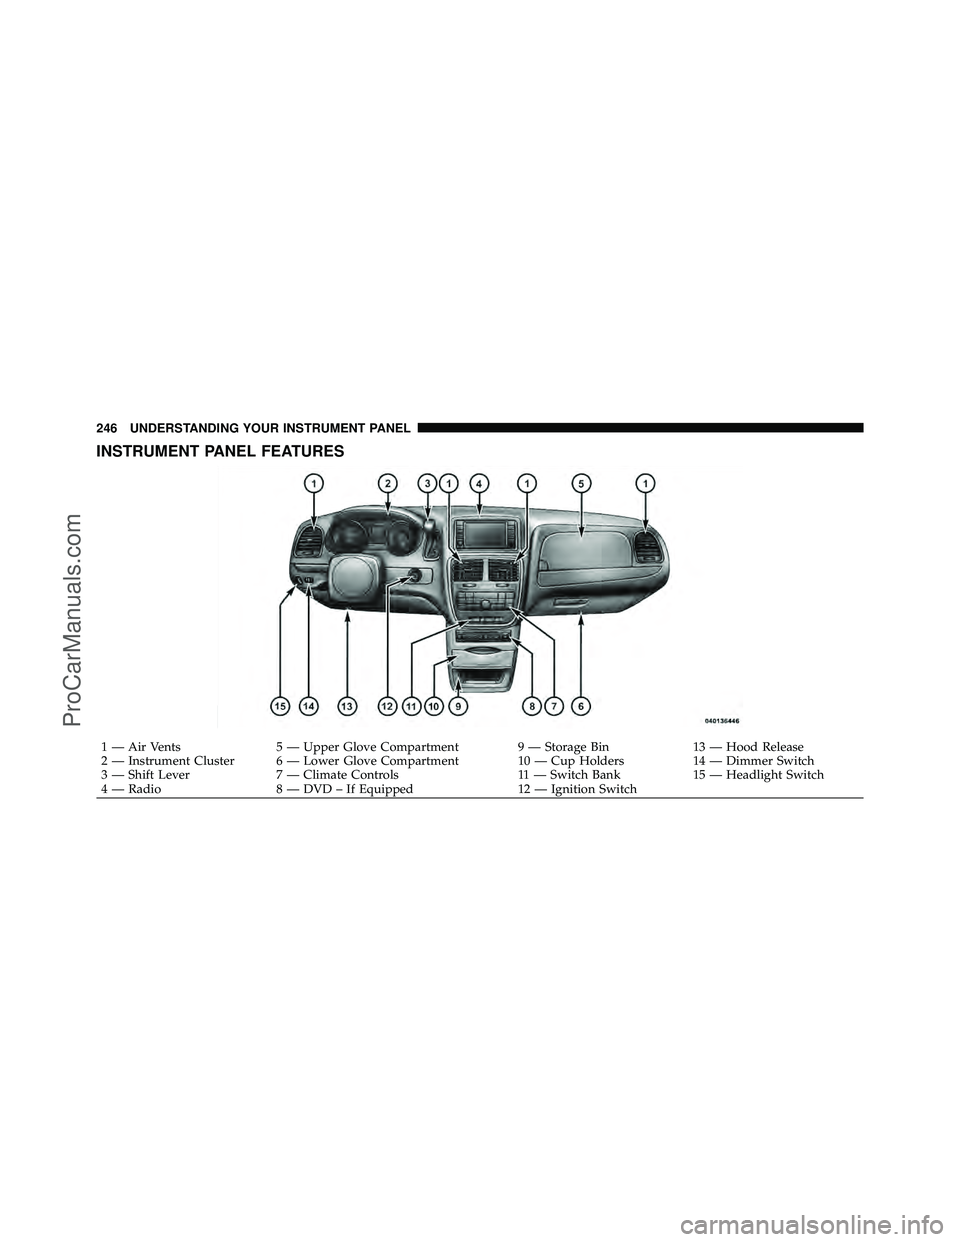 DODGE CARAVAN 2011  Owners Manual INSTRUMENT PANEL FEATURES
1 — Air Vents5 — Upper Glove Compartment 9 — Storage Bin 13 — Hood Release
2 — Instrument Cluster 6 — Lower Glove Compartment 10 — Cup Holders 14 — Dimmer Swi